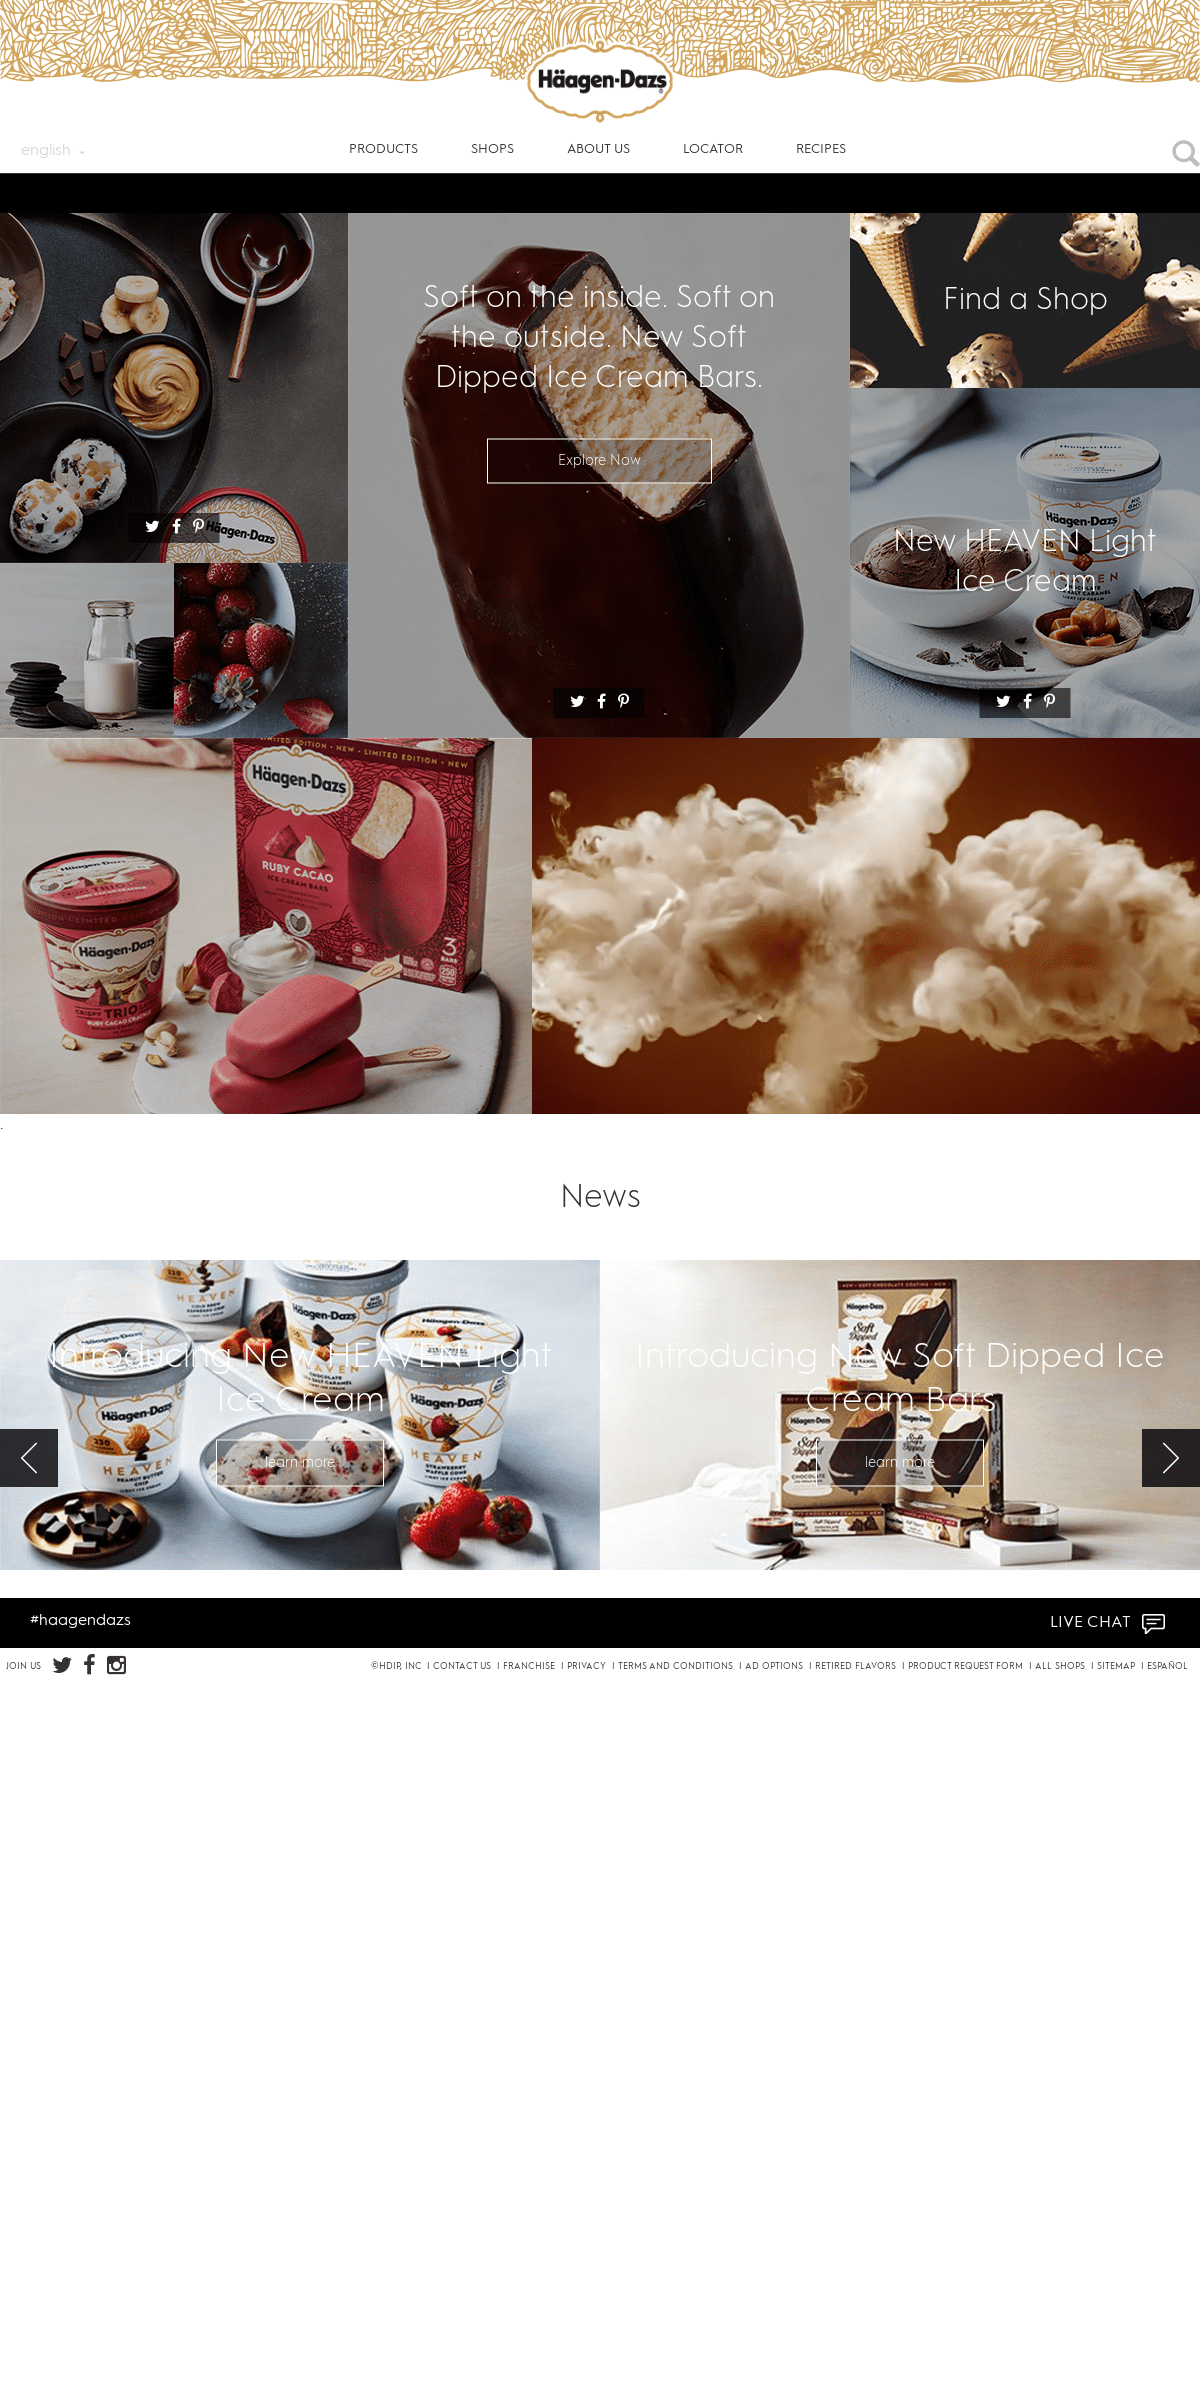 A complete backup of haagendazs.us